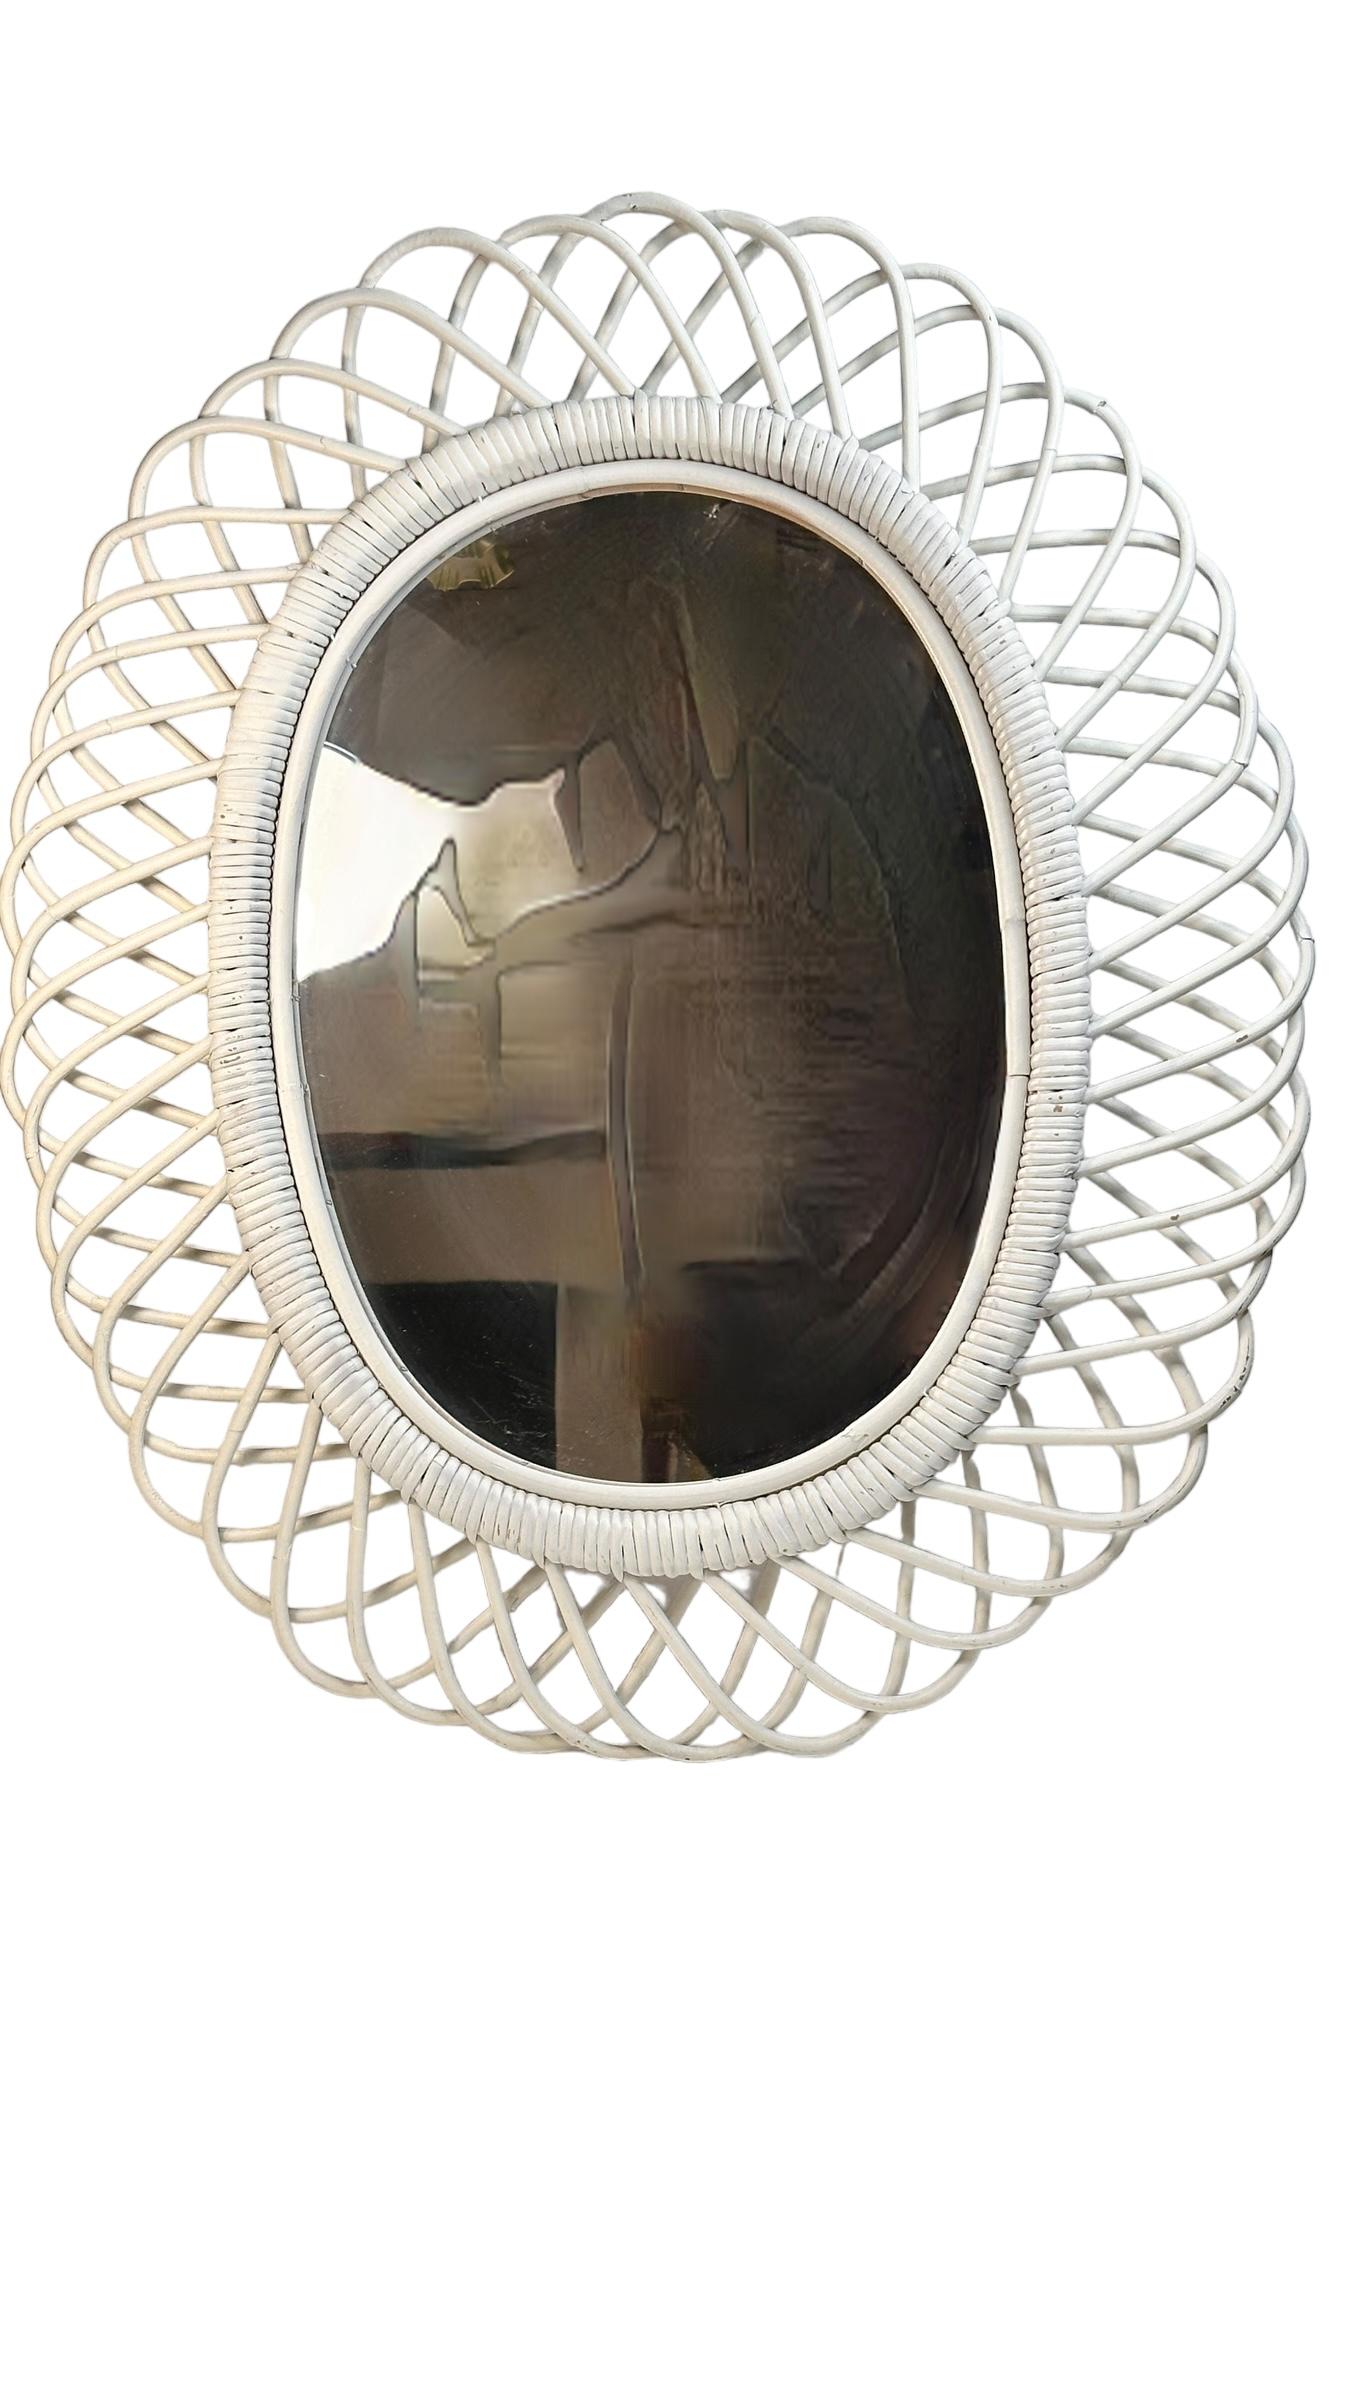 A flower burst or sunburst oval mirror handcrafted with rattan cane and wicker. A natural and fresh accent for any space with a taste of the Mediterranean Coast. These mirrors were typical in Italy in the 1960s-1970s. This would be a gorgeous piece